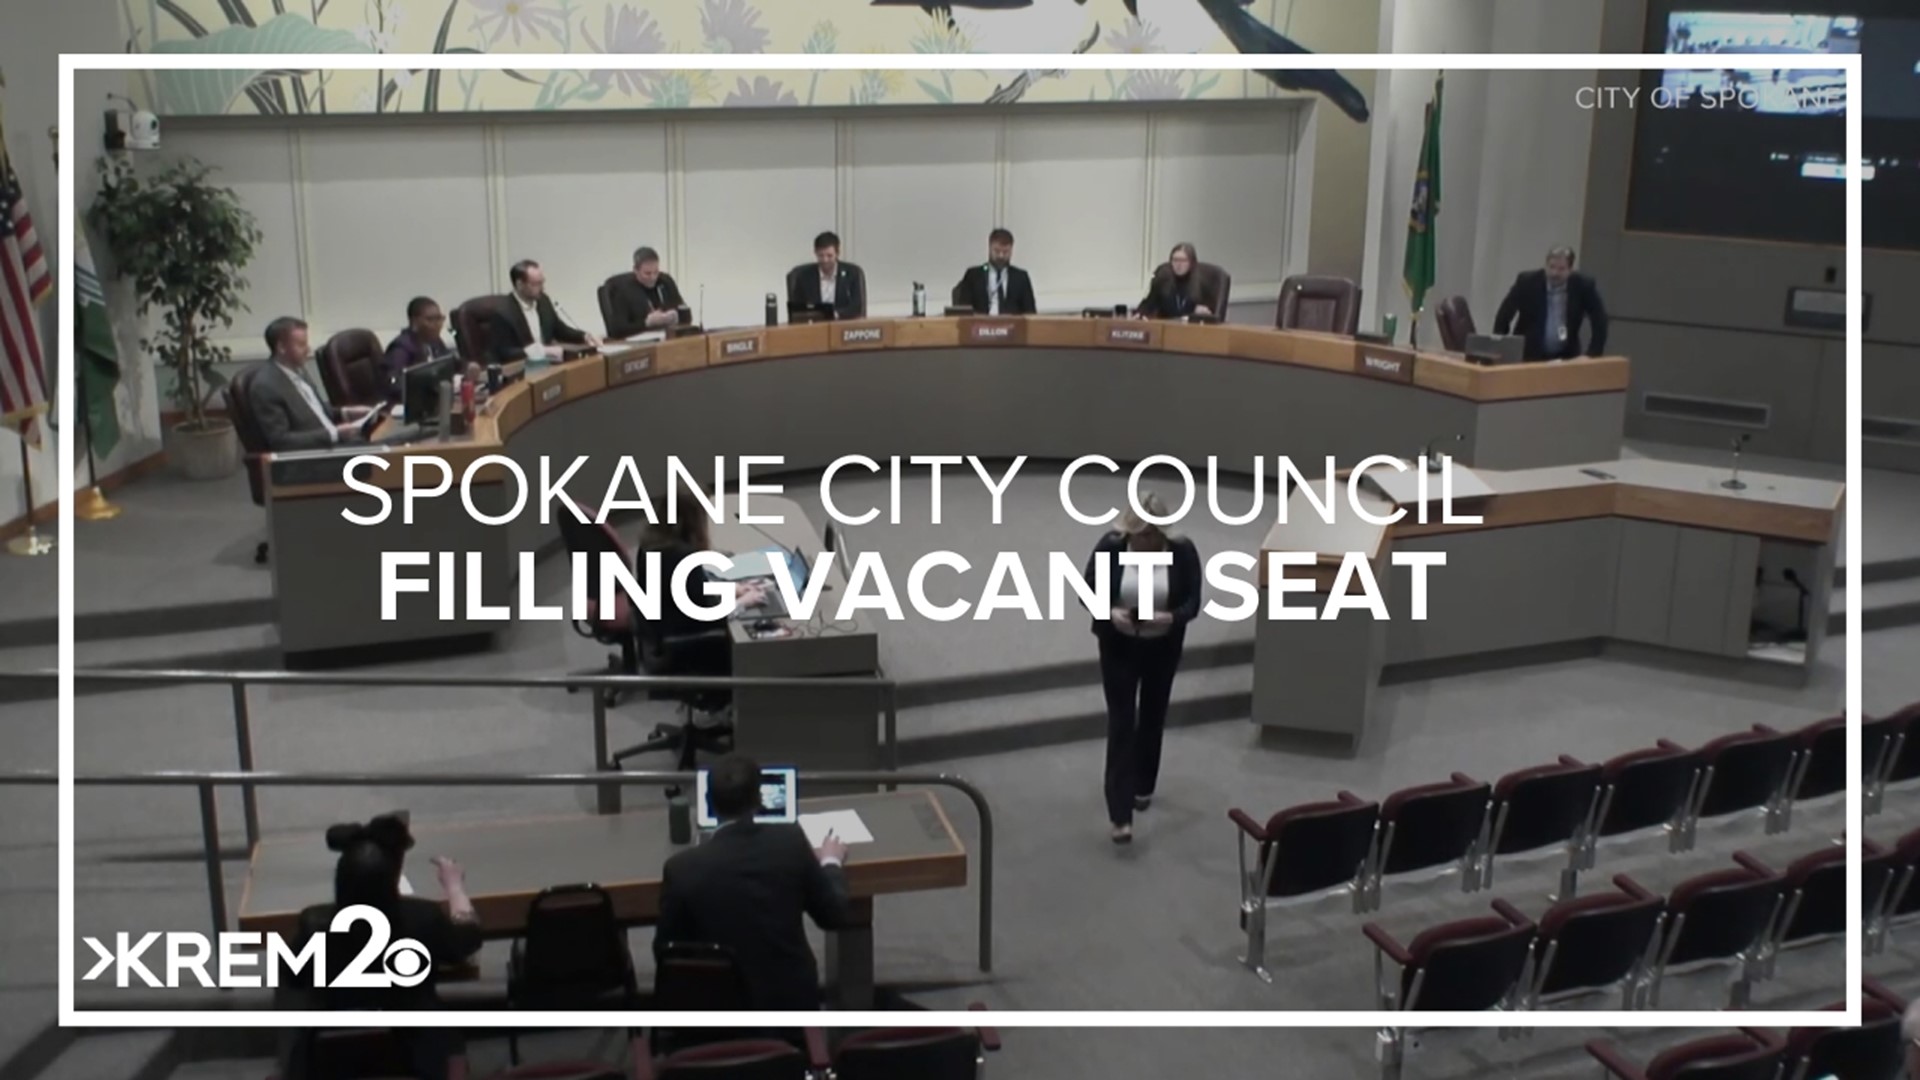 17 people applied for the open seat. Out of those applicants, five received an interview for the position by the entire city council.